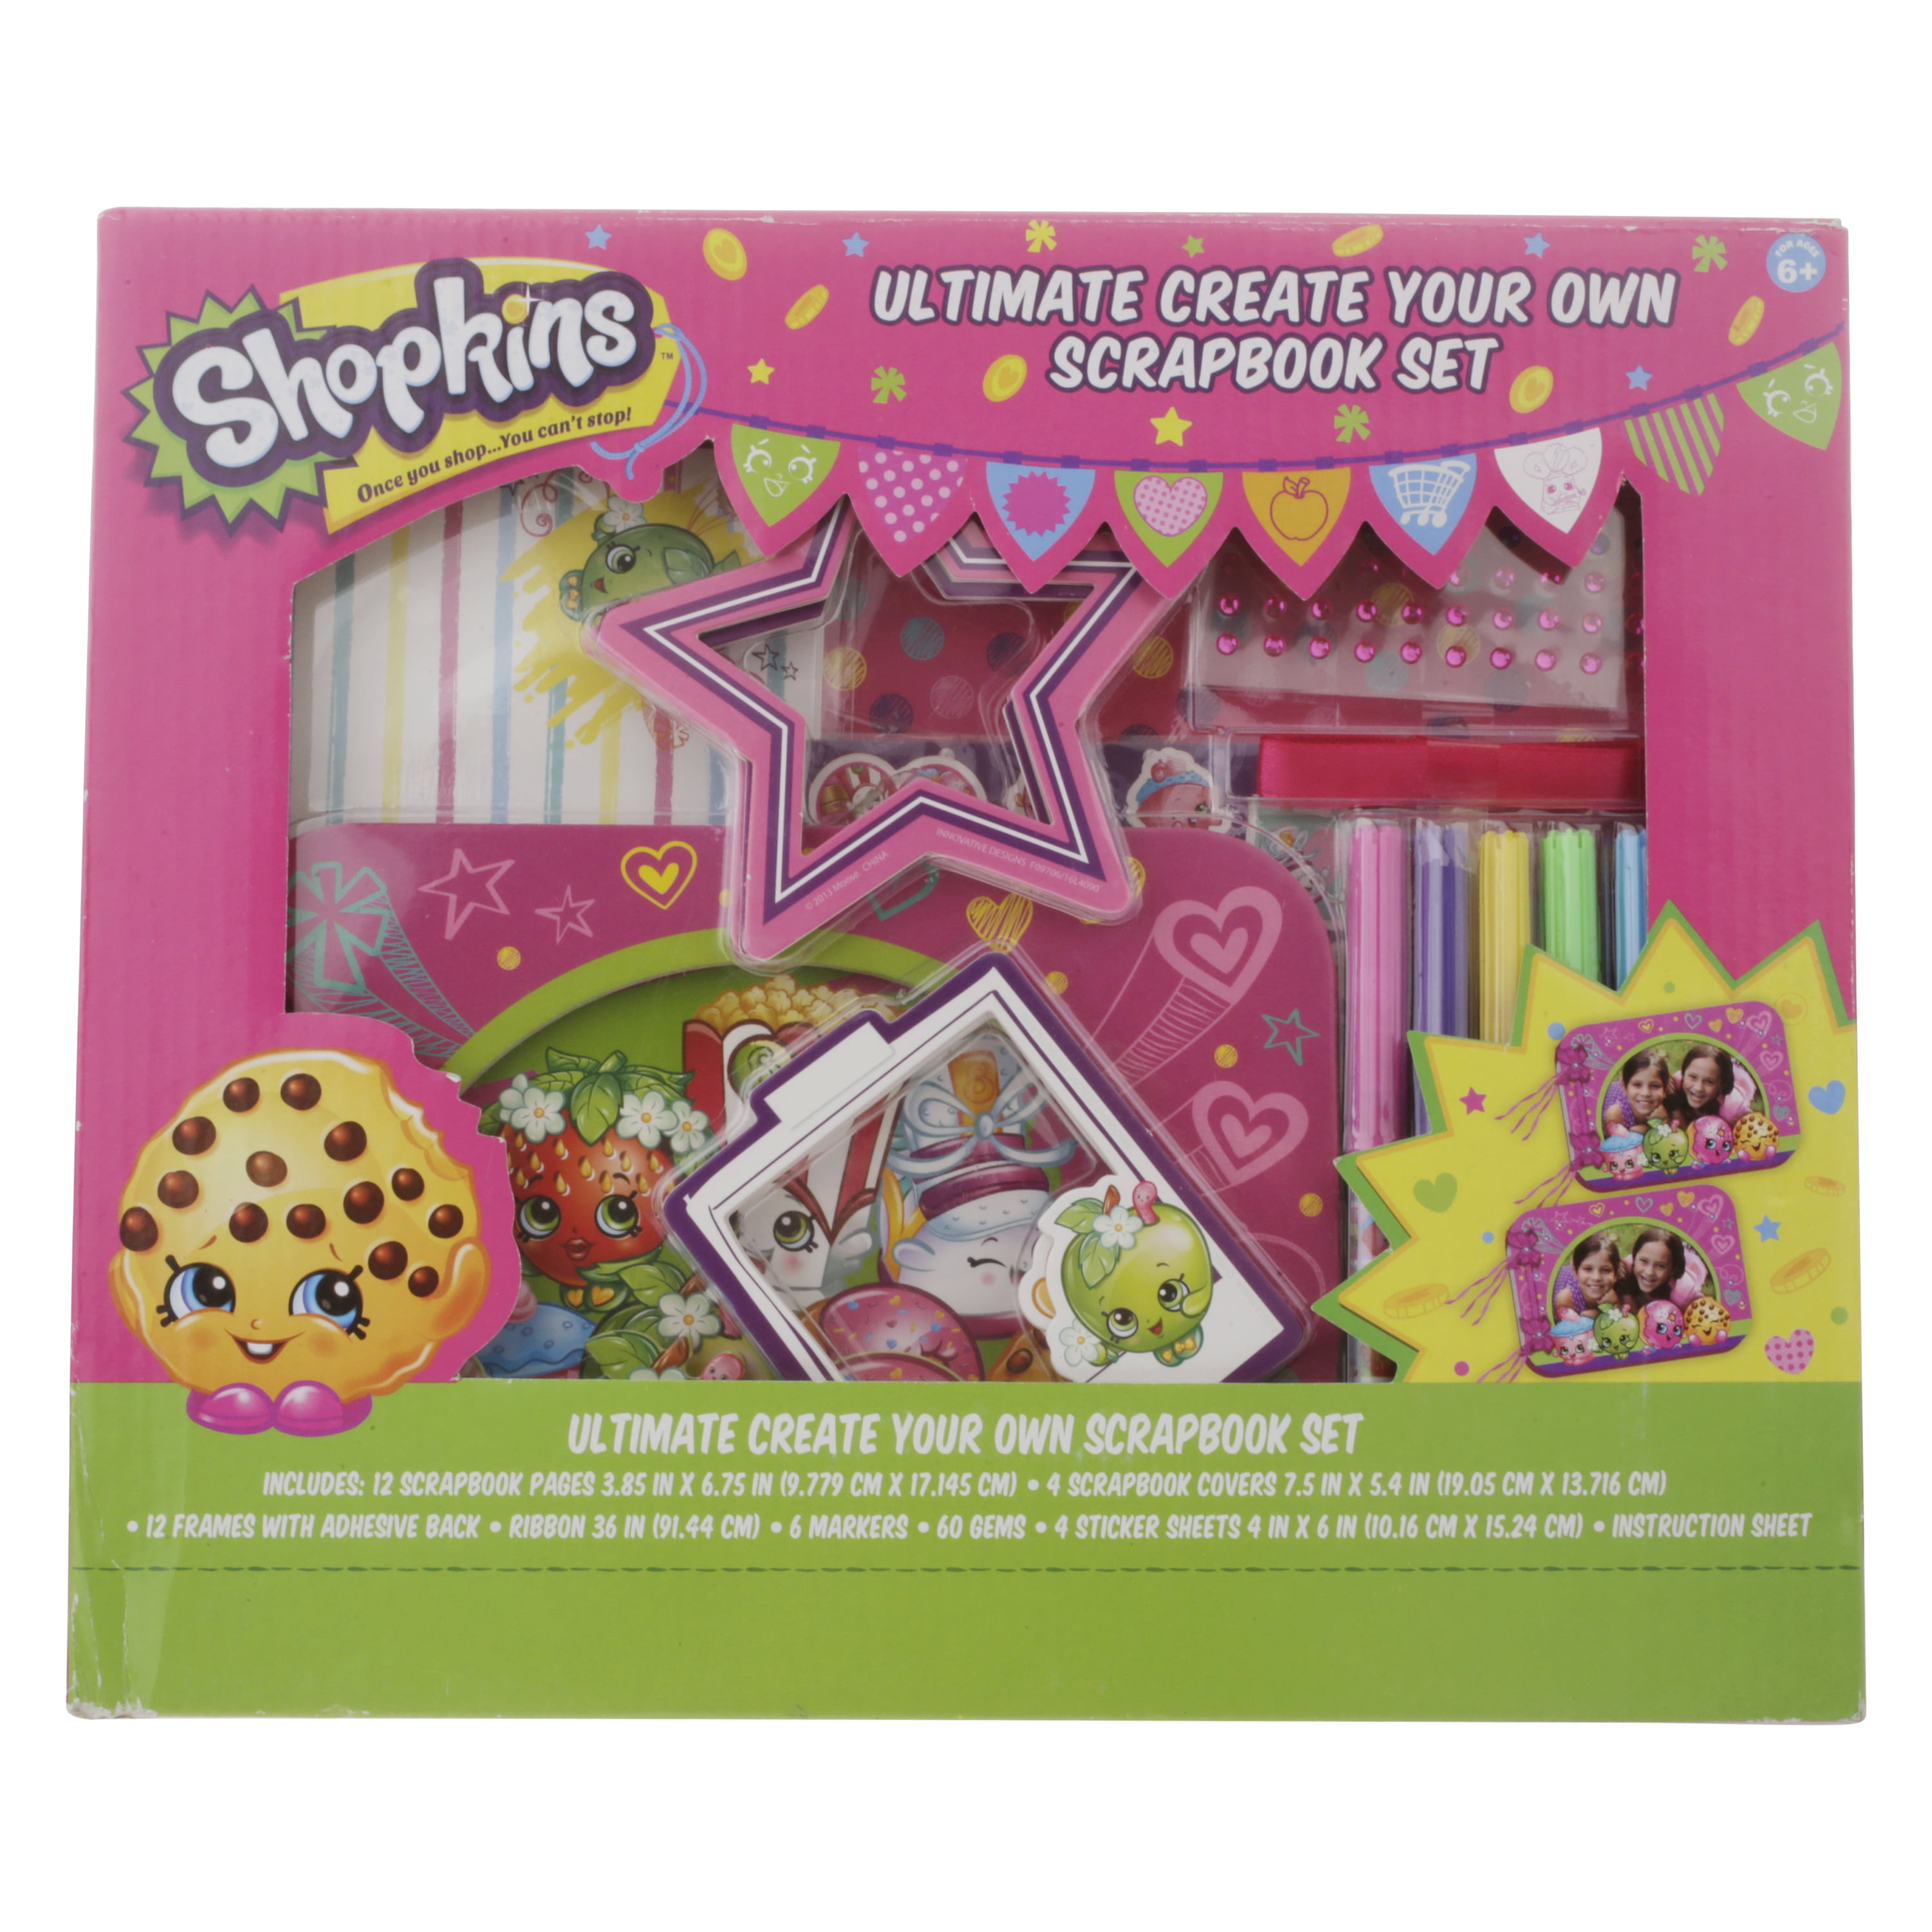 NEW Shopkins Ultimate Create Your Own Scrapbook Set Innovative Designs Age  6+